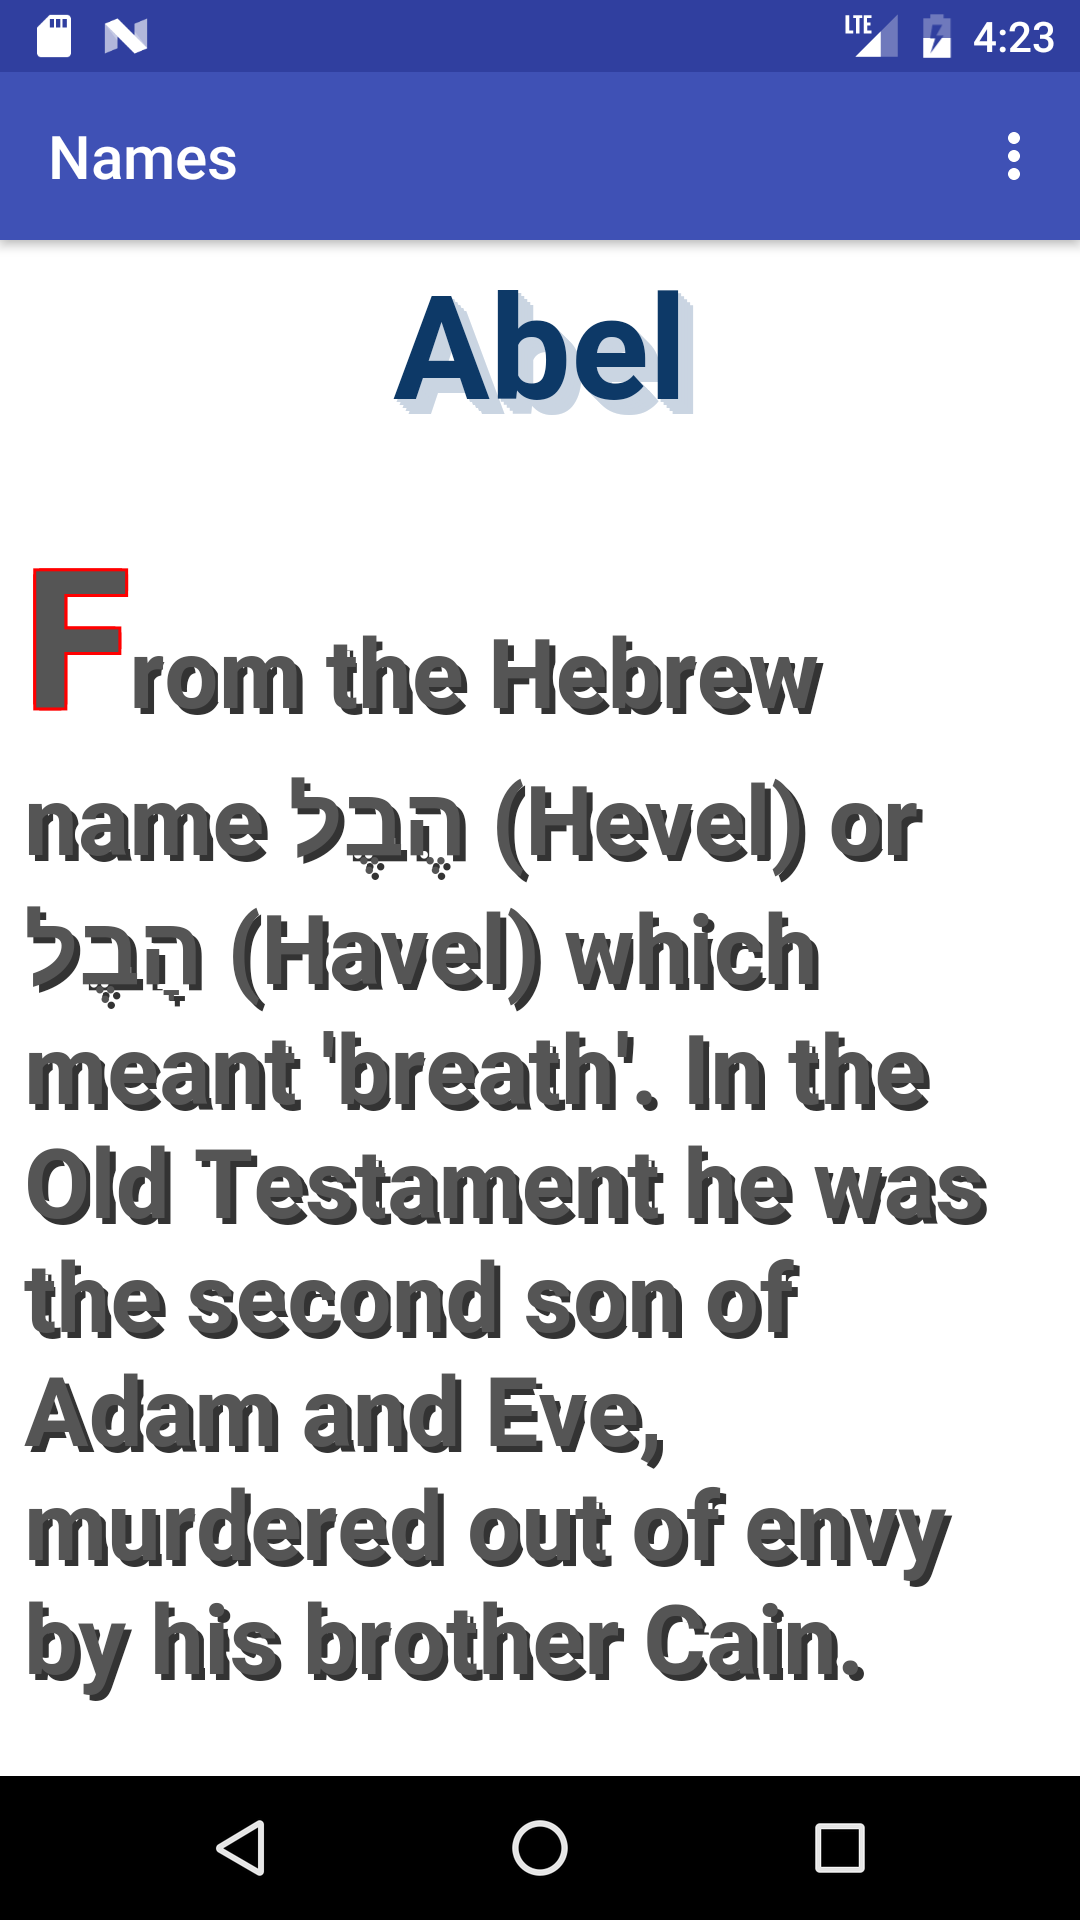 Meaning and origin of the name